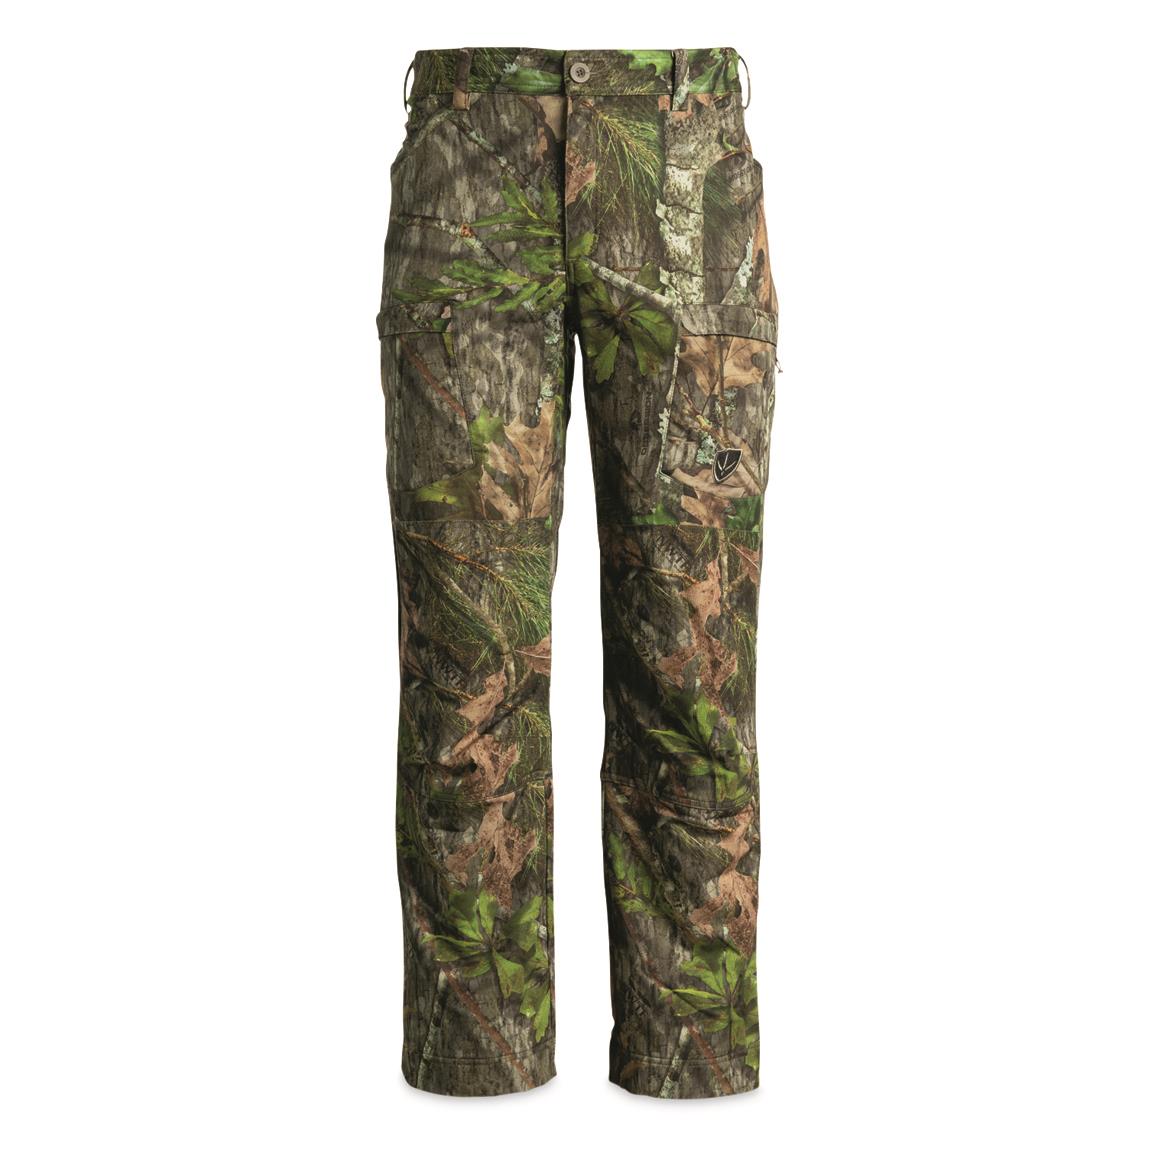 Leg Gaiters | Personal Accessories | Clothing | Sportsman's Guide